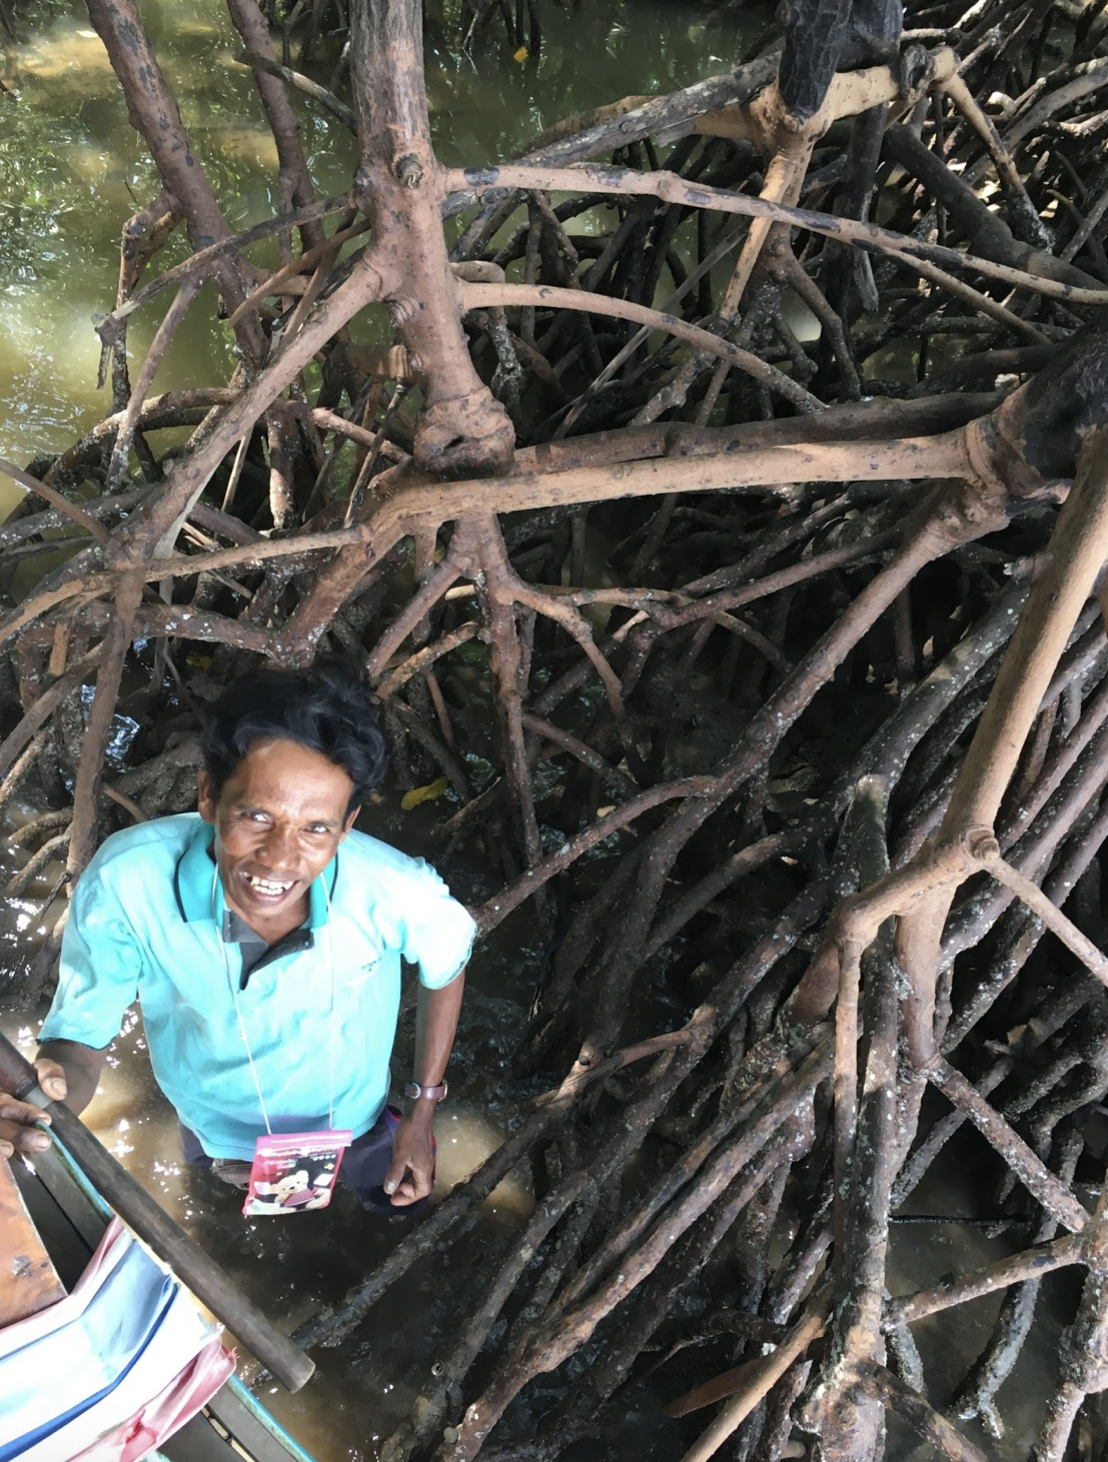 “Every mangrove forest is like a safe home for marine animals”: Why mangroves are important for tropical communities